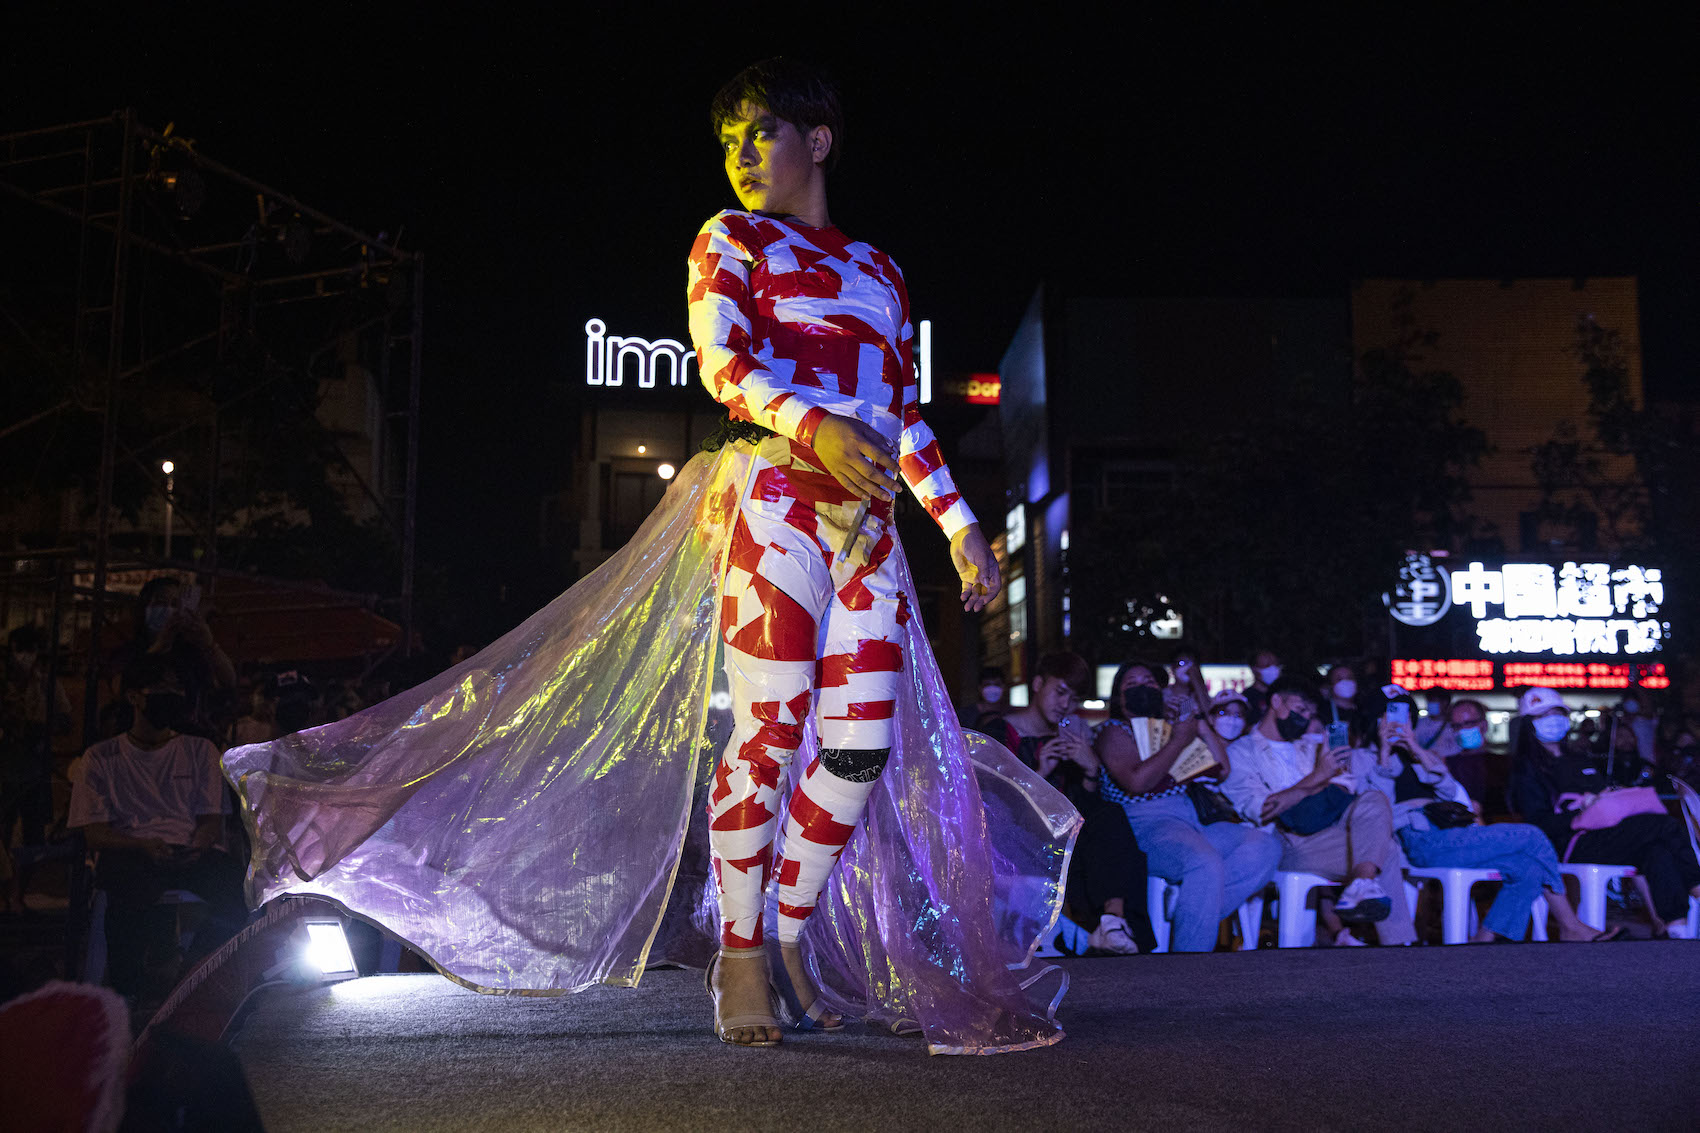 Thai activists take part in a sex worker fashion show on Labor Day on May 01, 2022 in Chiang Mai, Thailand